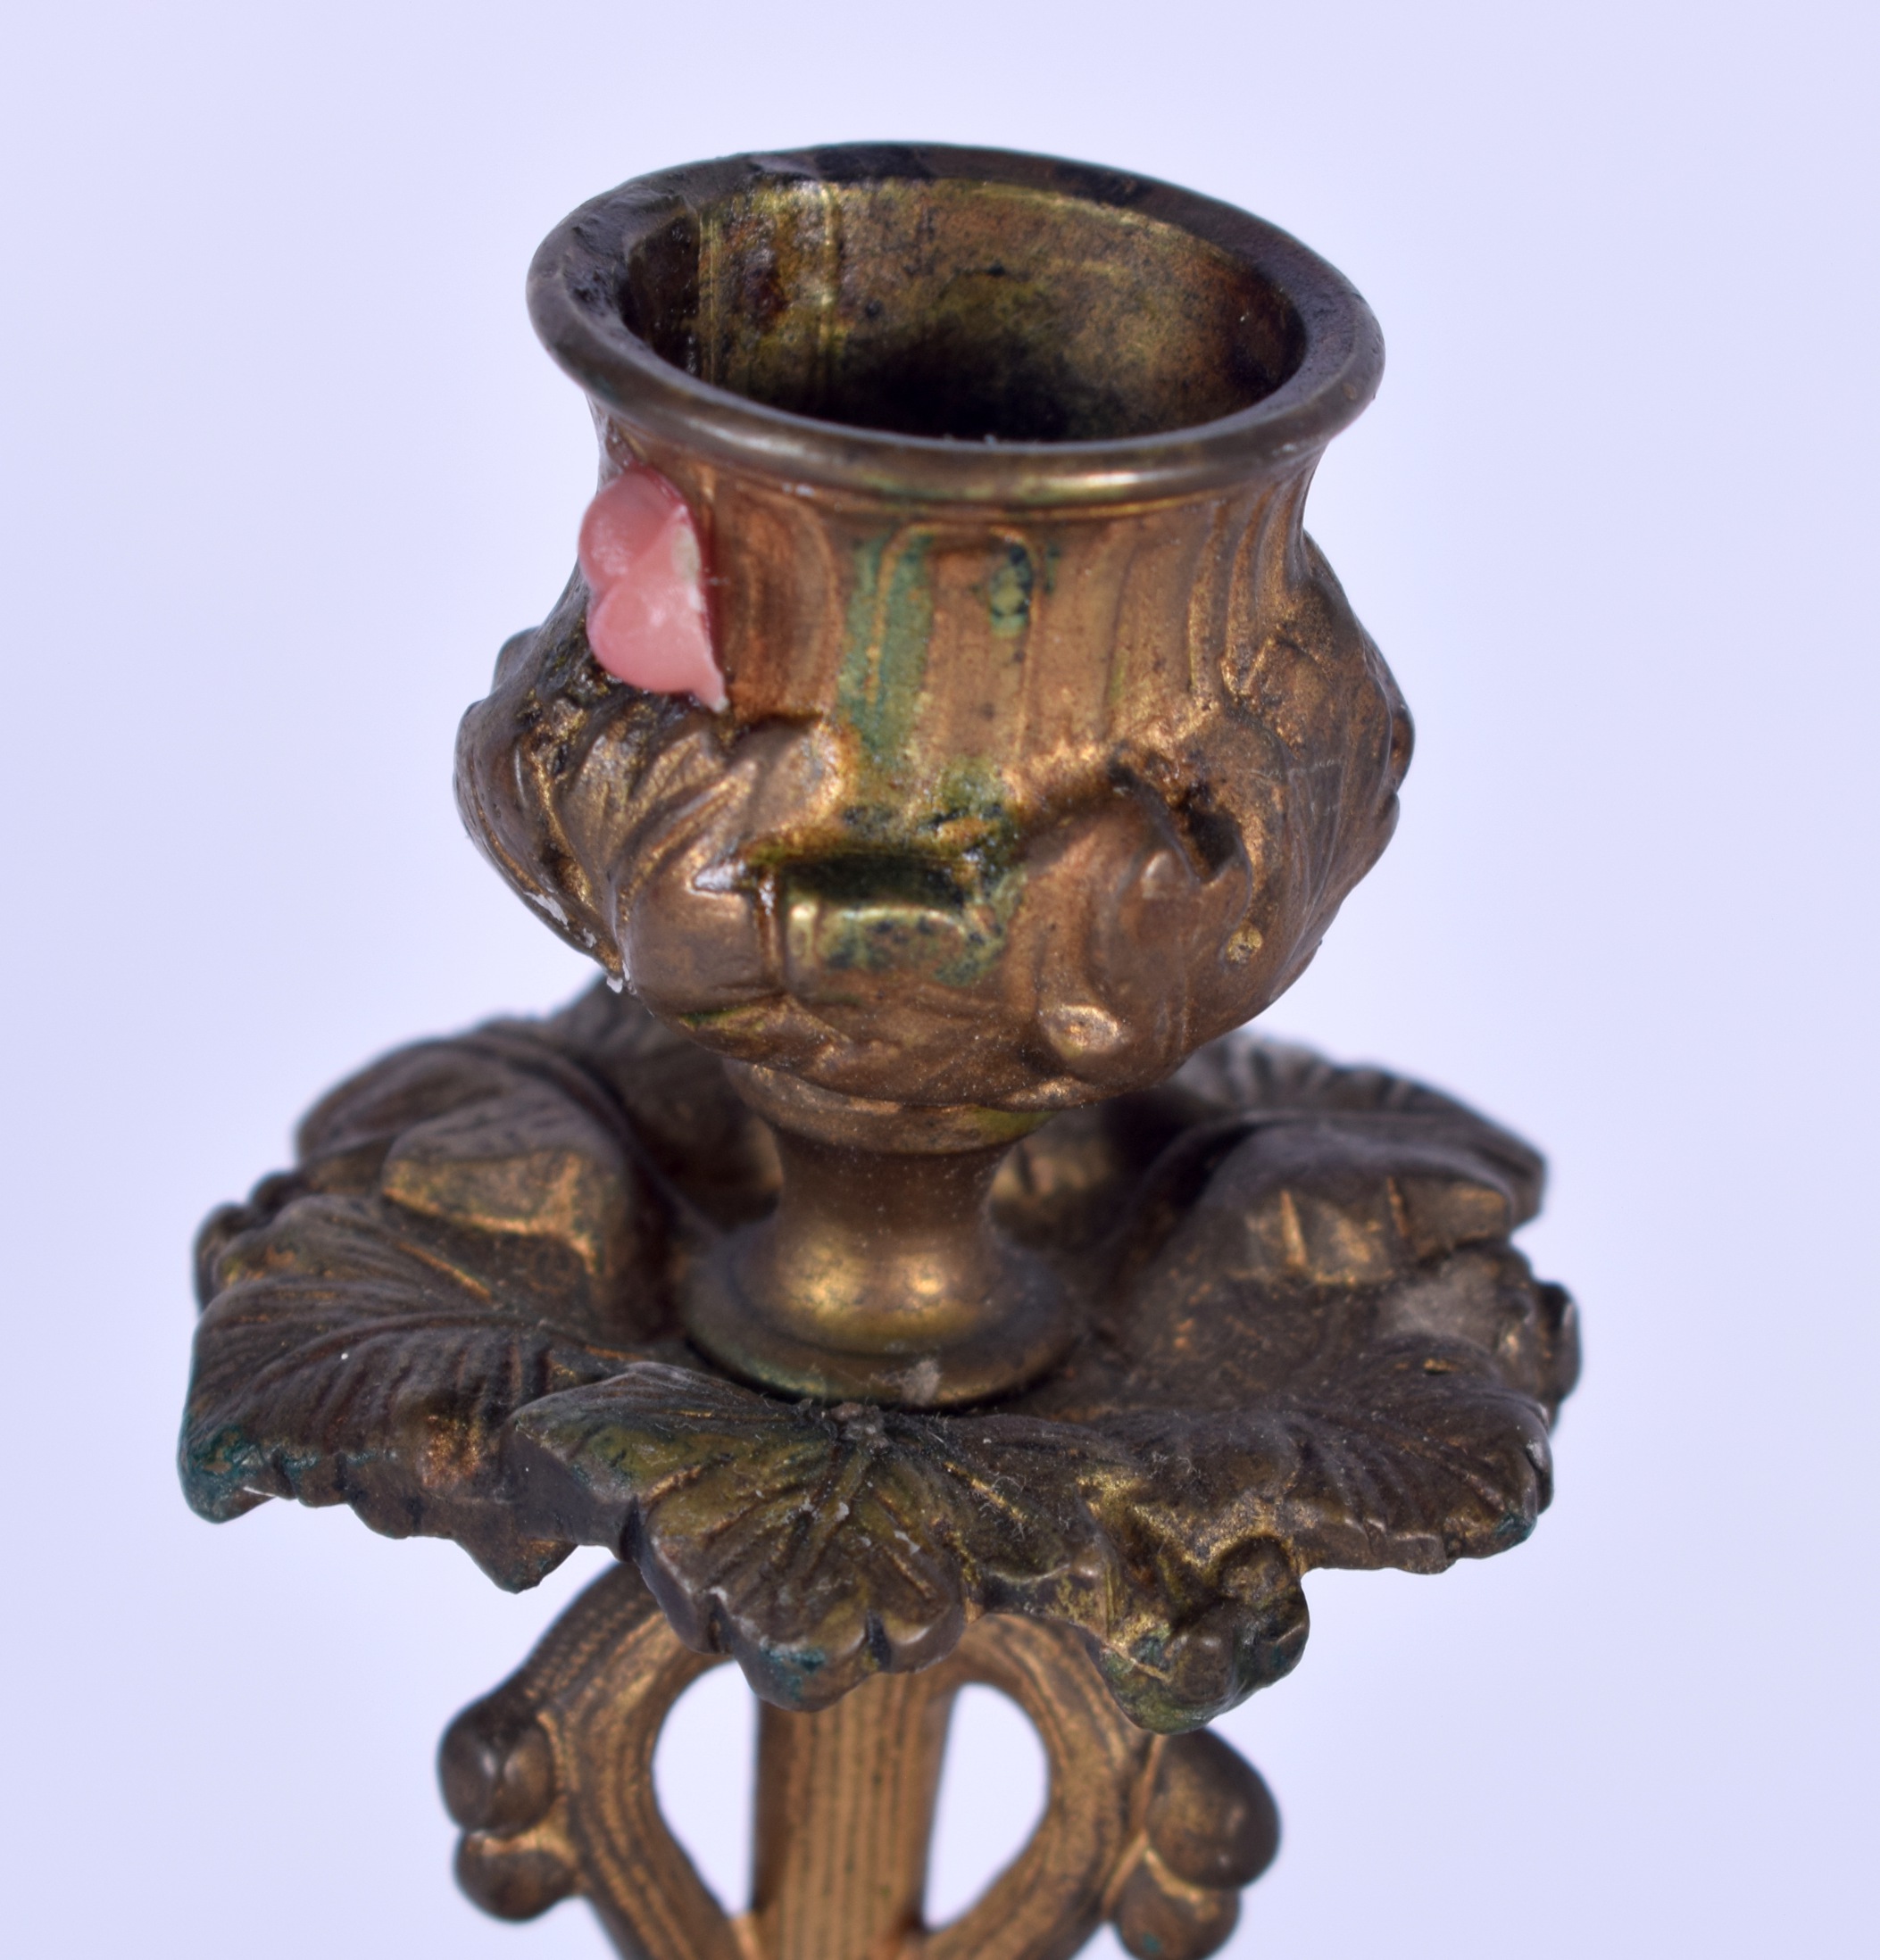 A PAIR OF BRONZE CANDLESTICKS, the feet in the form of fruiting vines. 23 cm high. - Image 2 of 3